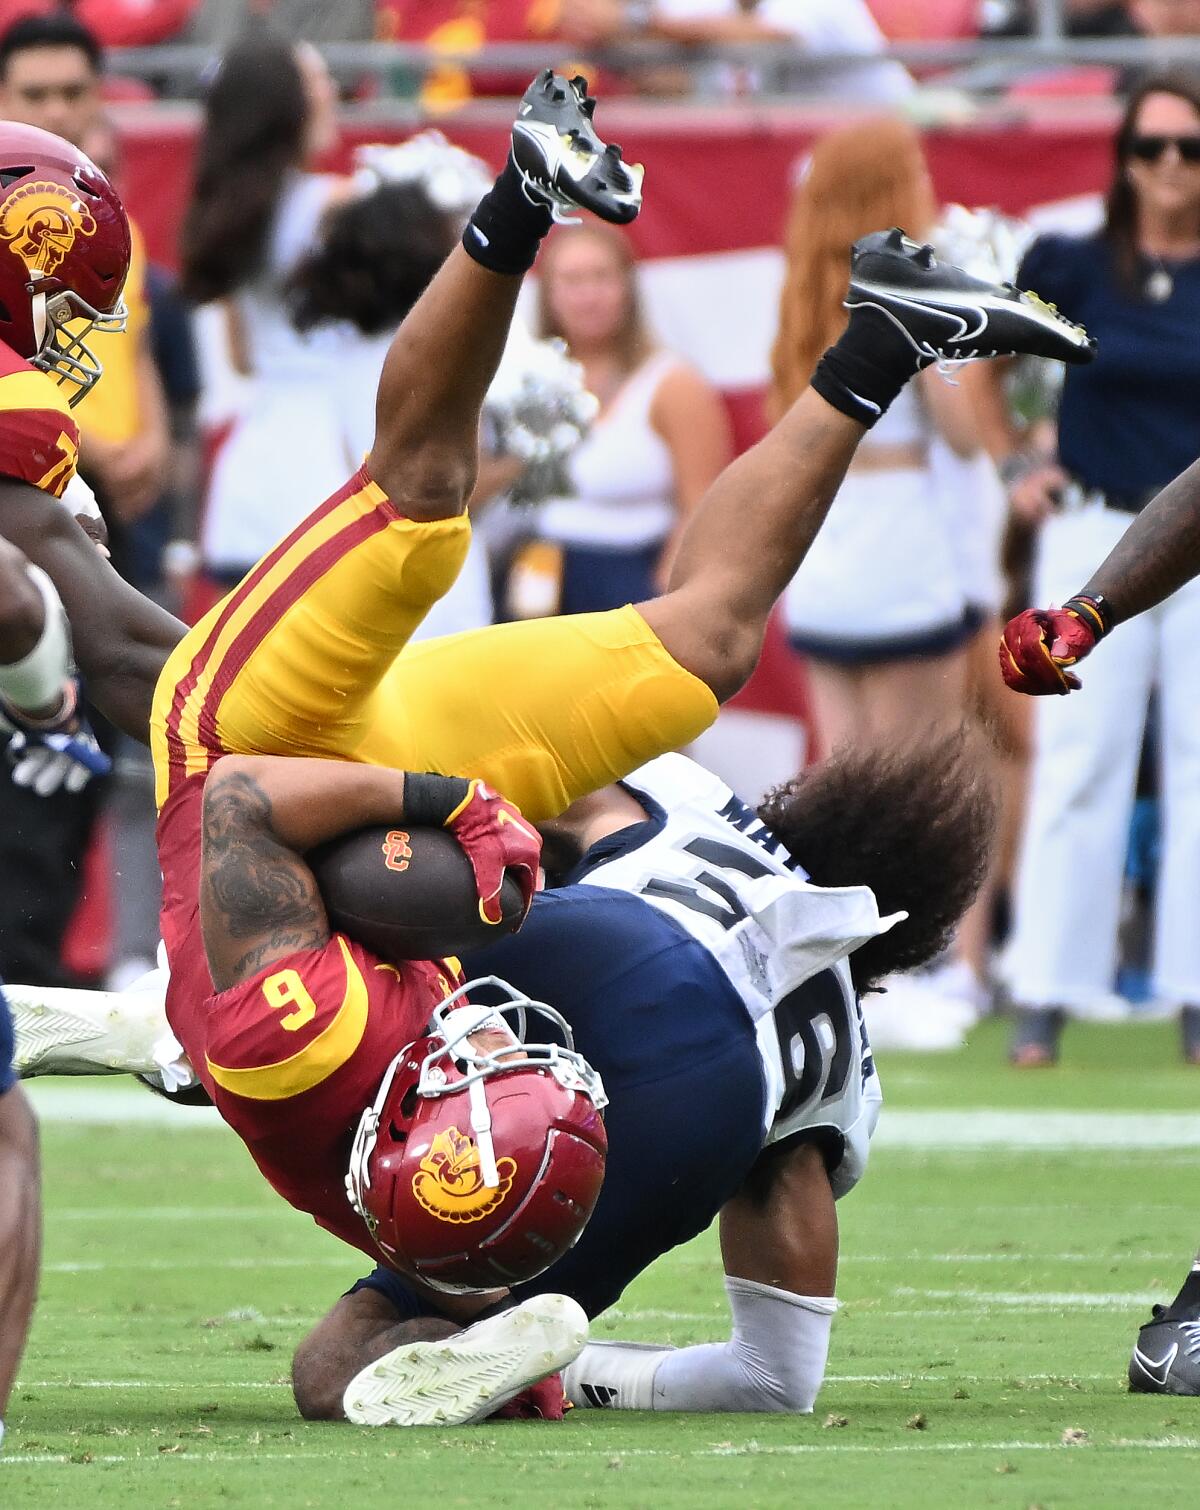 USC running back Austin Jones is upended after a gain against Nevada in the first quarter.